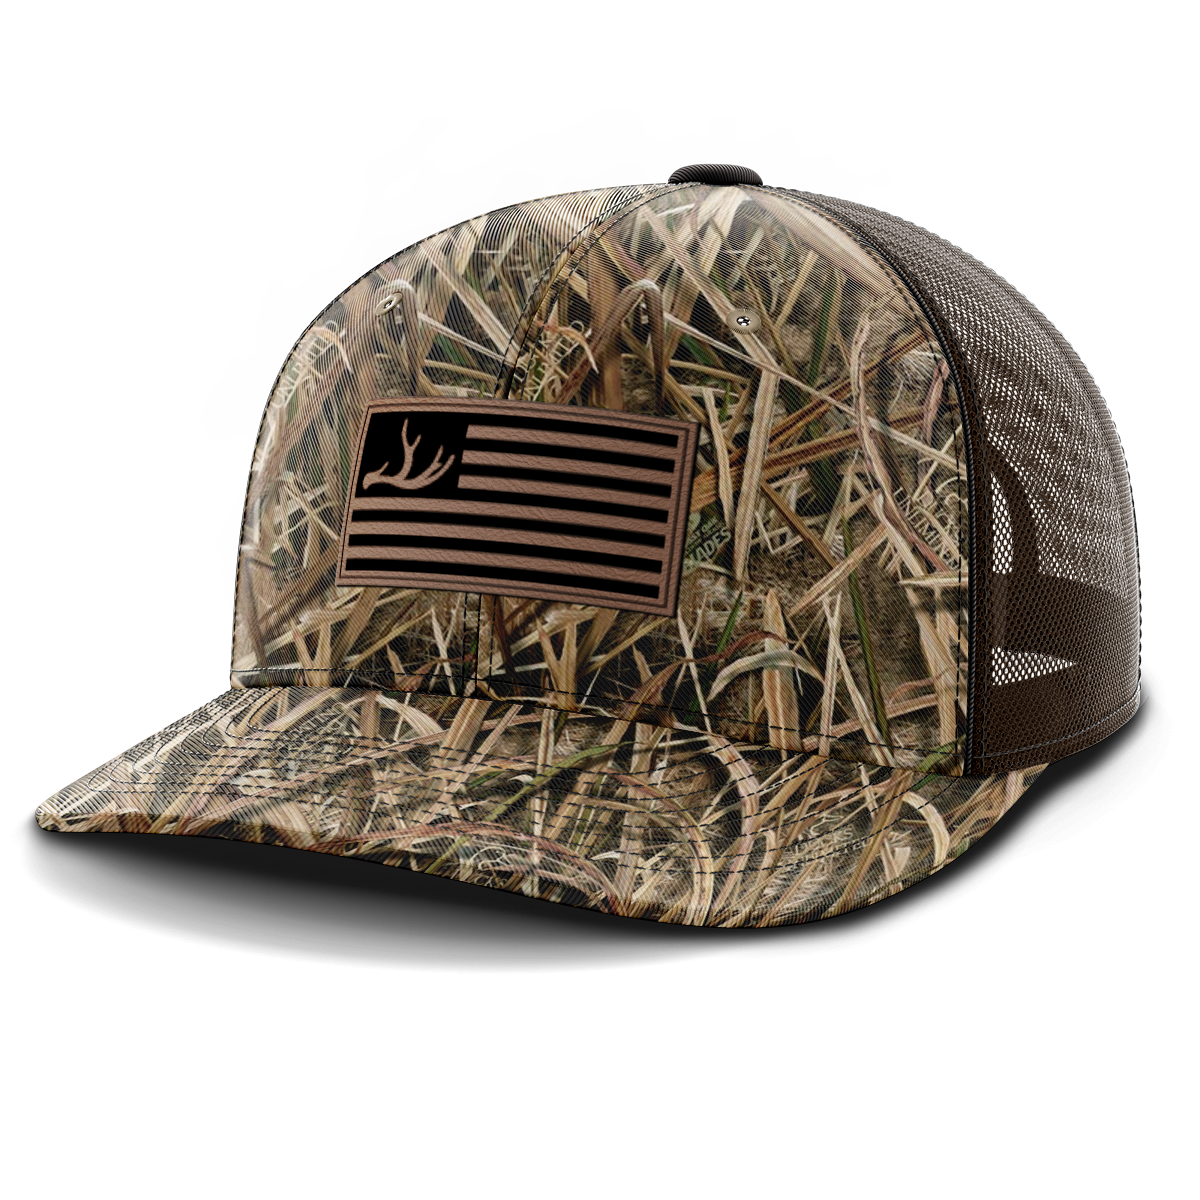 Leather Patch Trucker Hat, Deer & Shed Hunting, Flag & Antlers